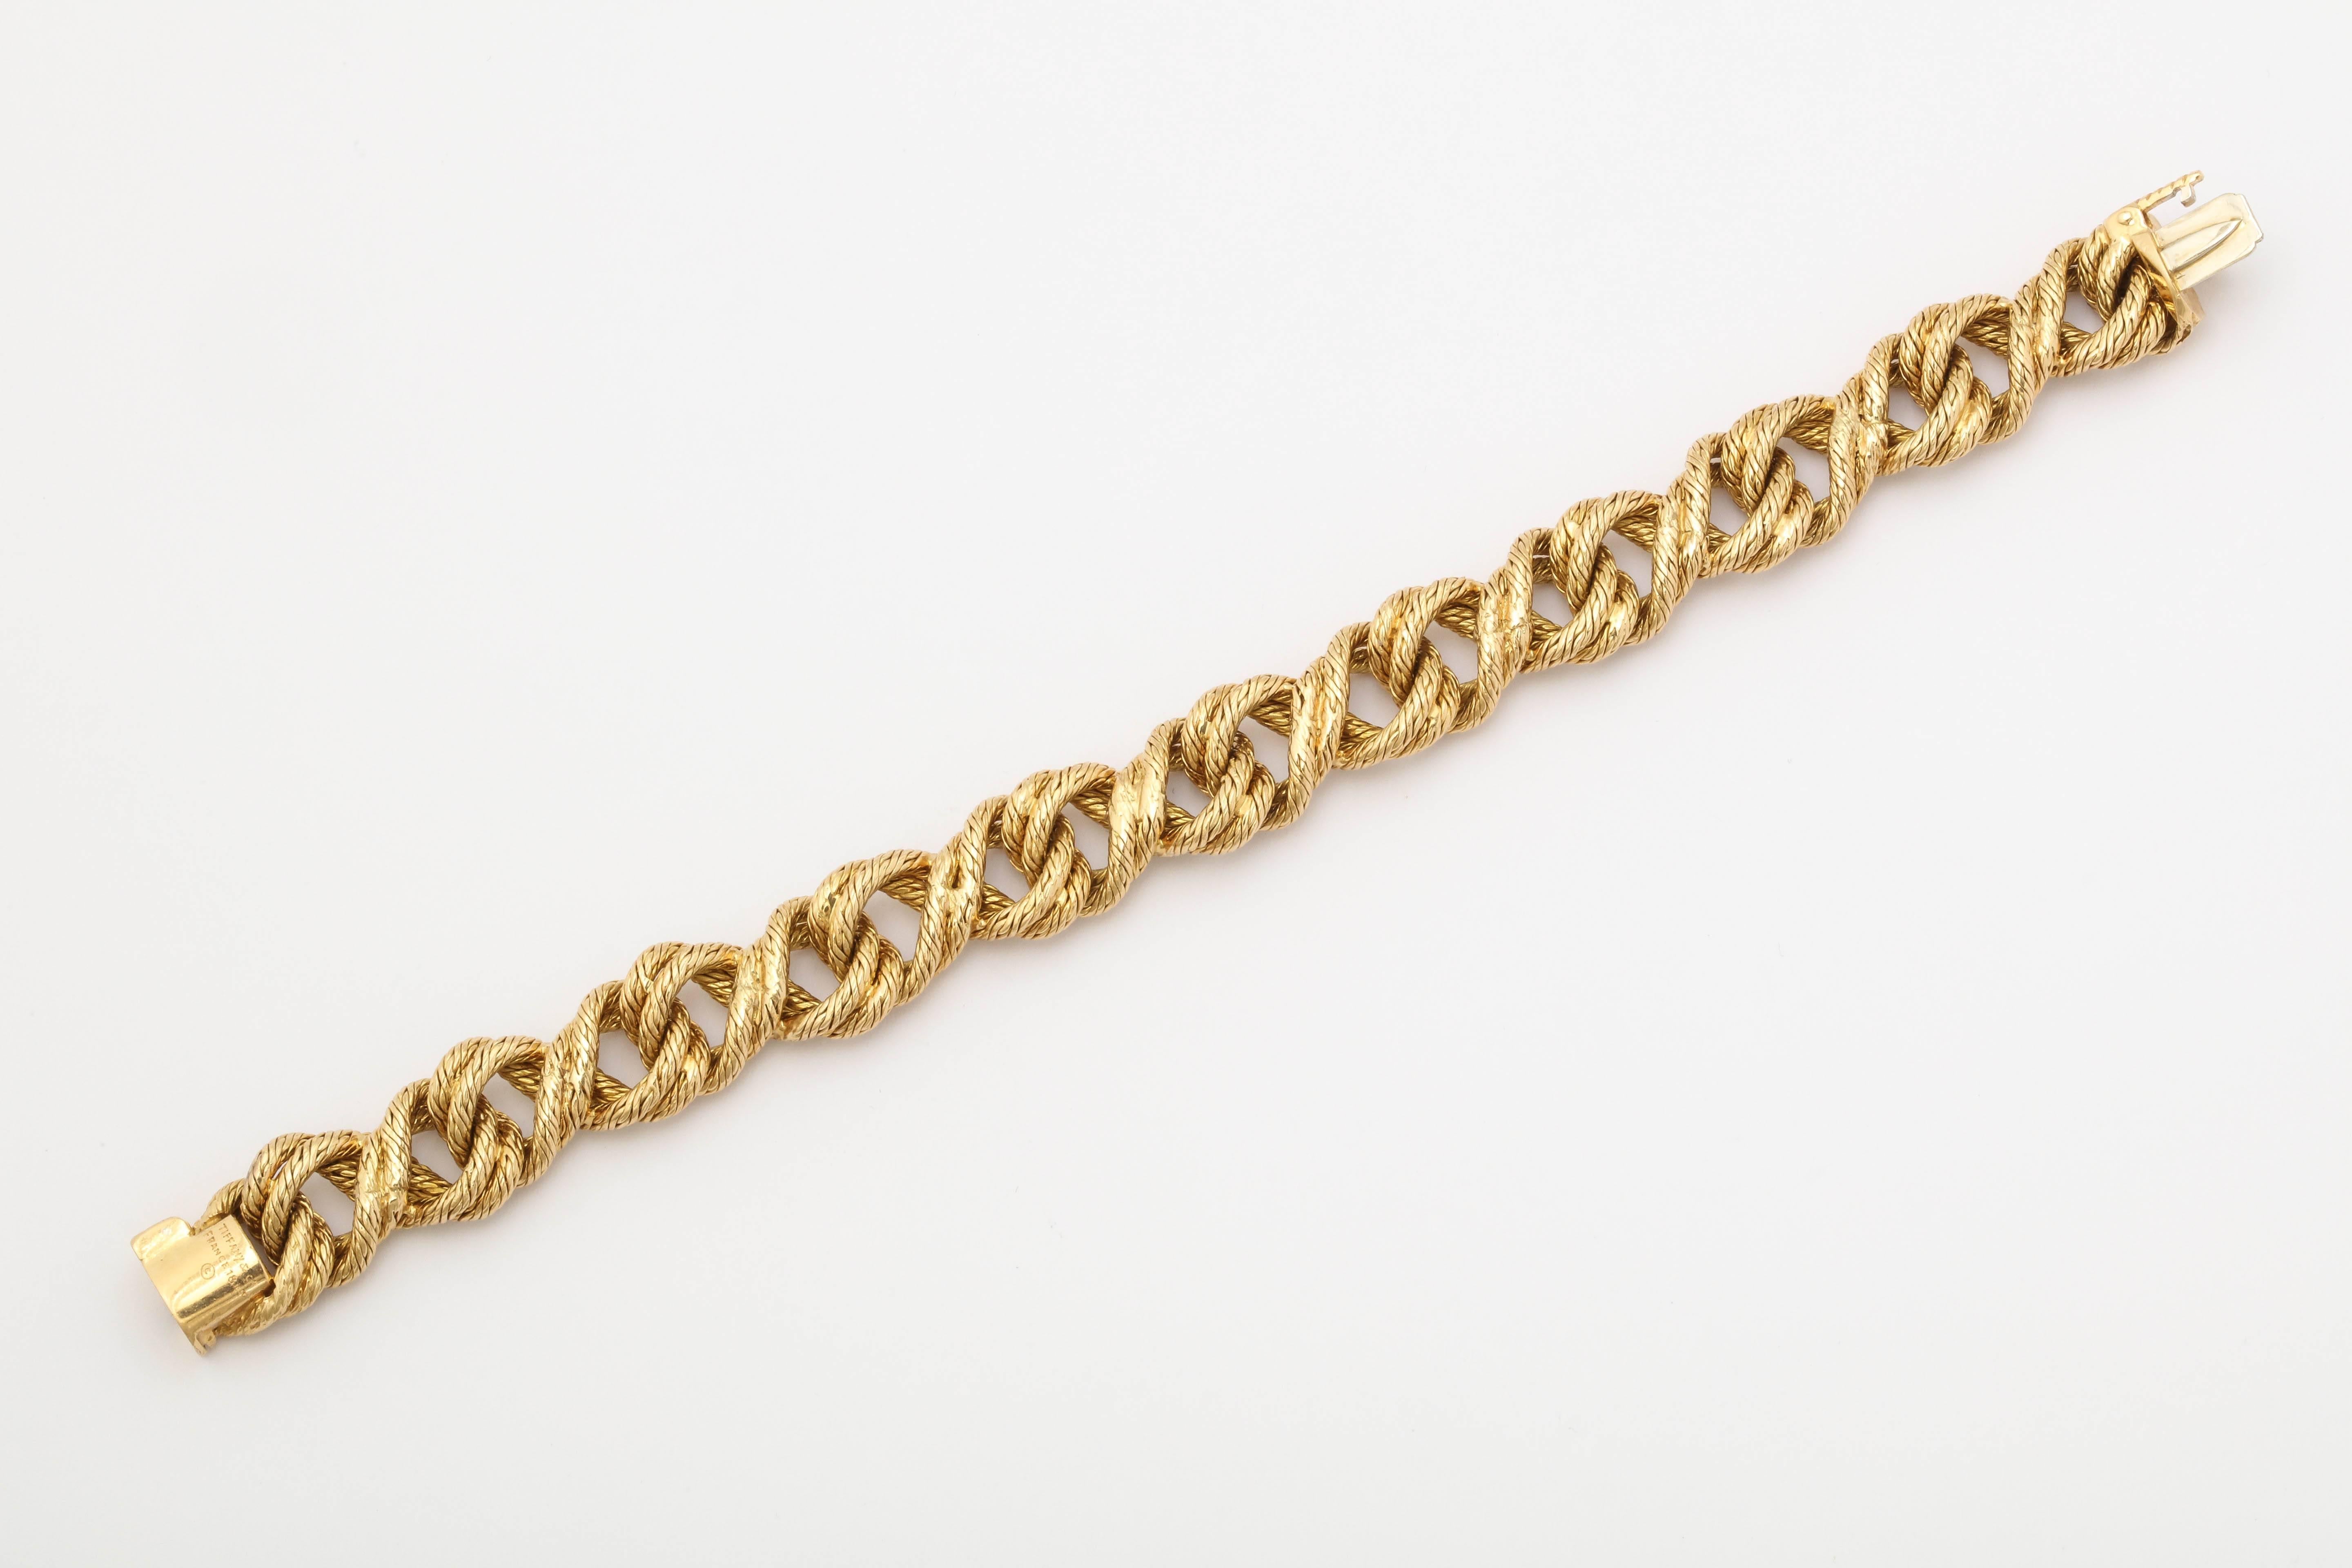 Tiffany & Co. France 1950s Reversible Two-Textured Gold Link Flexible Bracelet 1